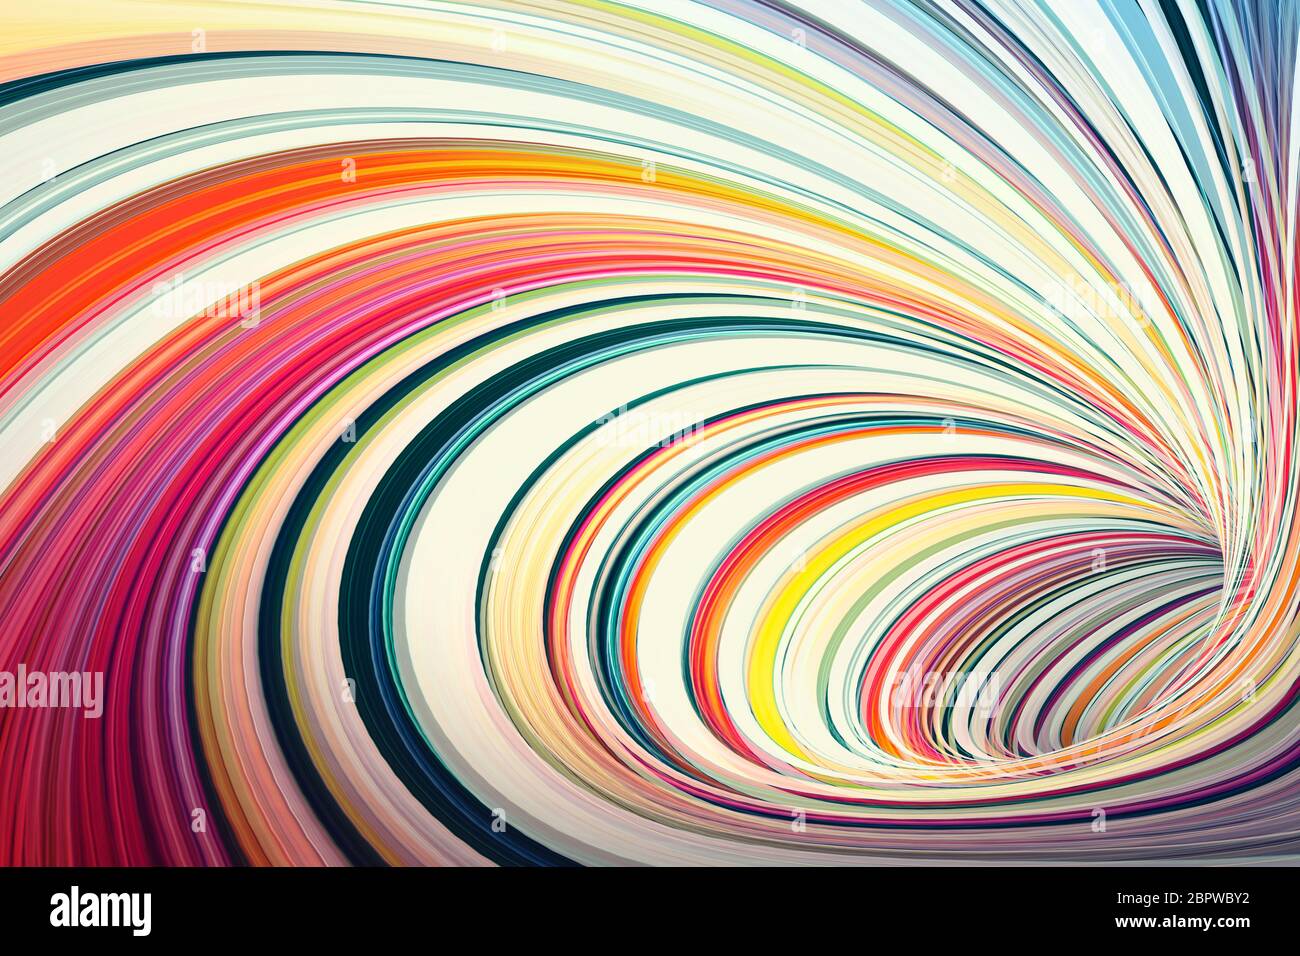 Colorful abstract cgi background texture, colorful twisted tunnel, 3d rendering illustration Stock Photo